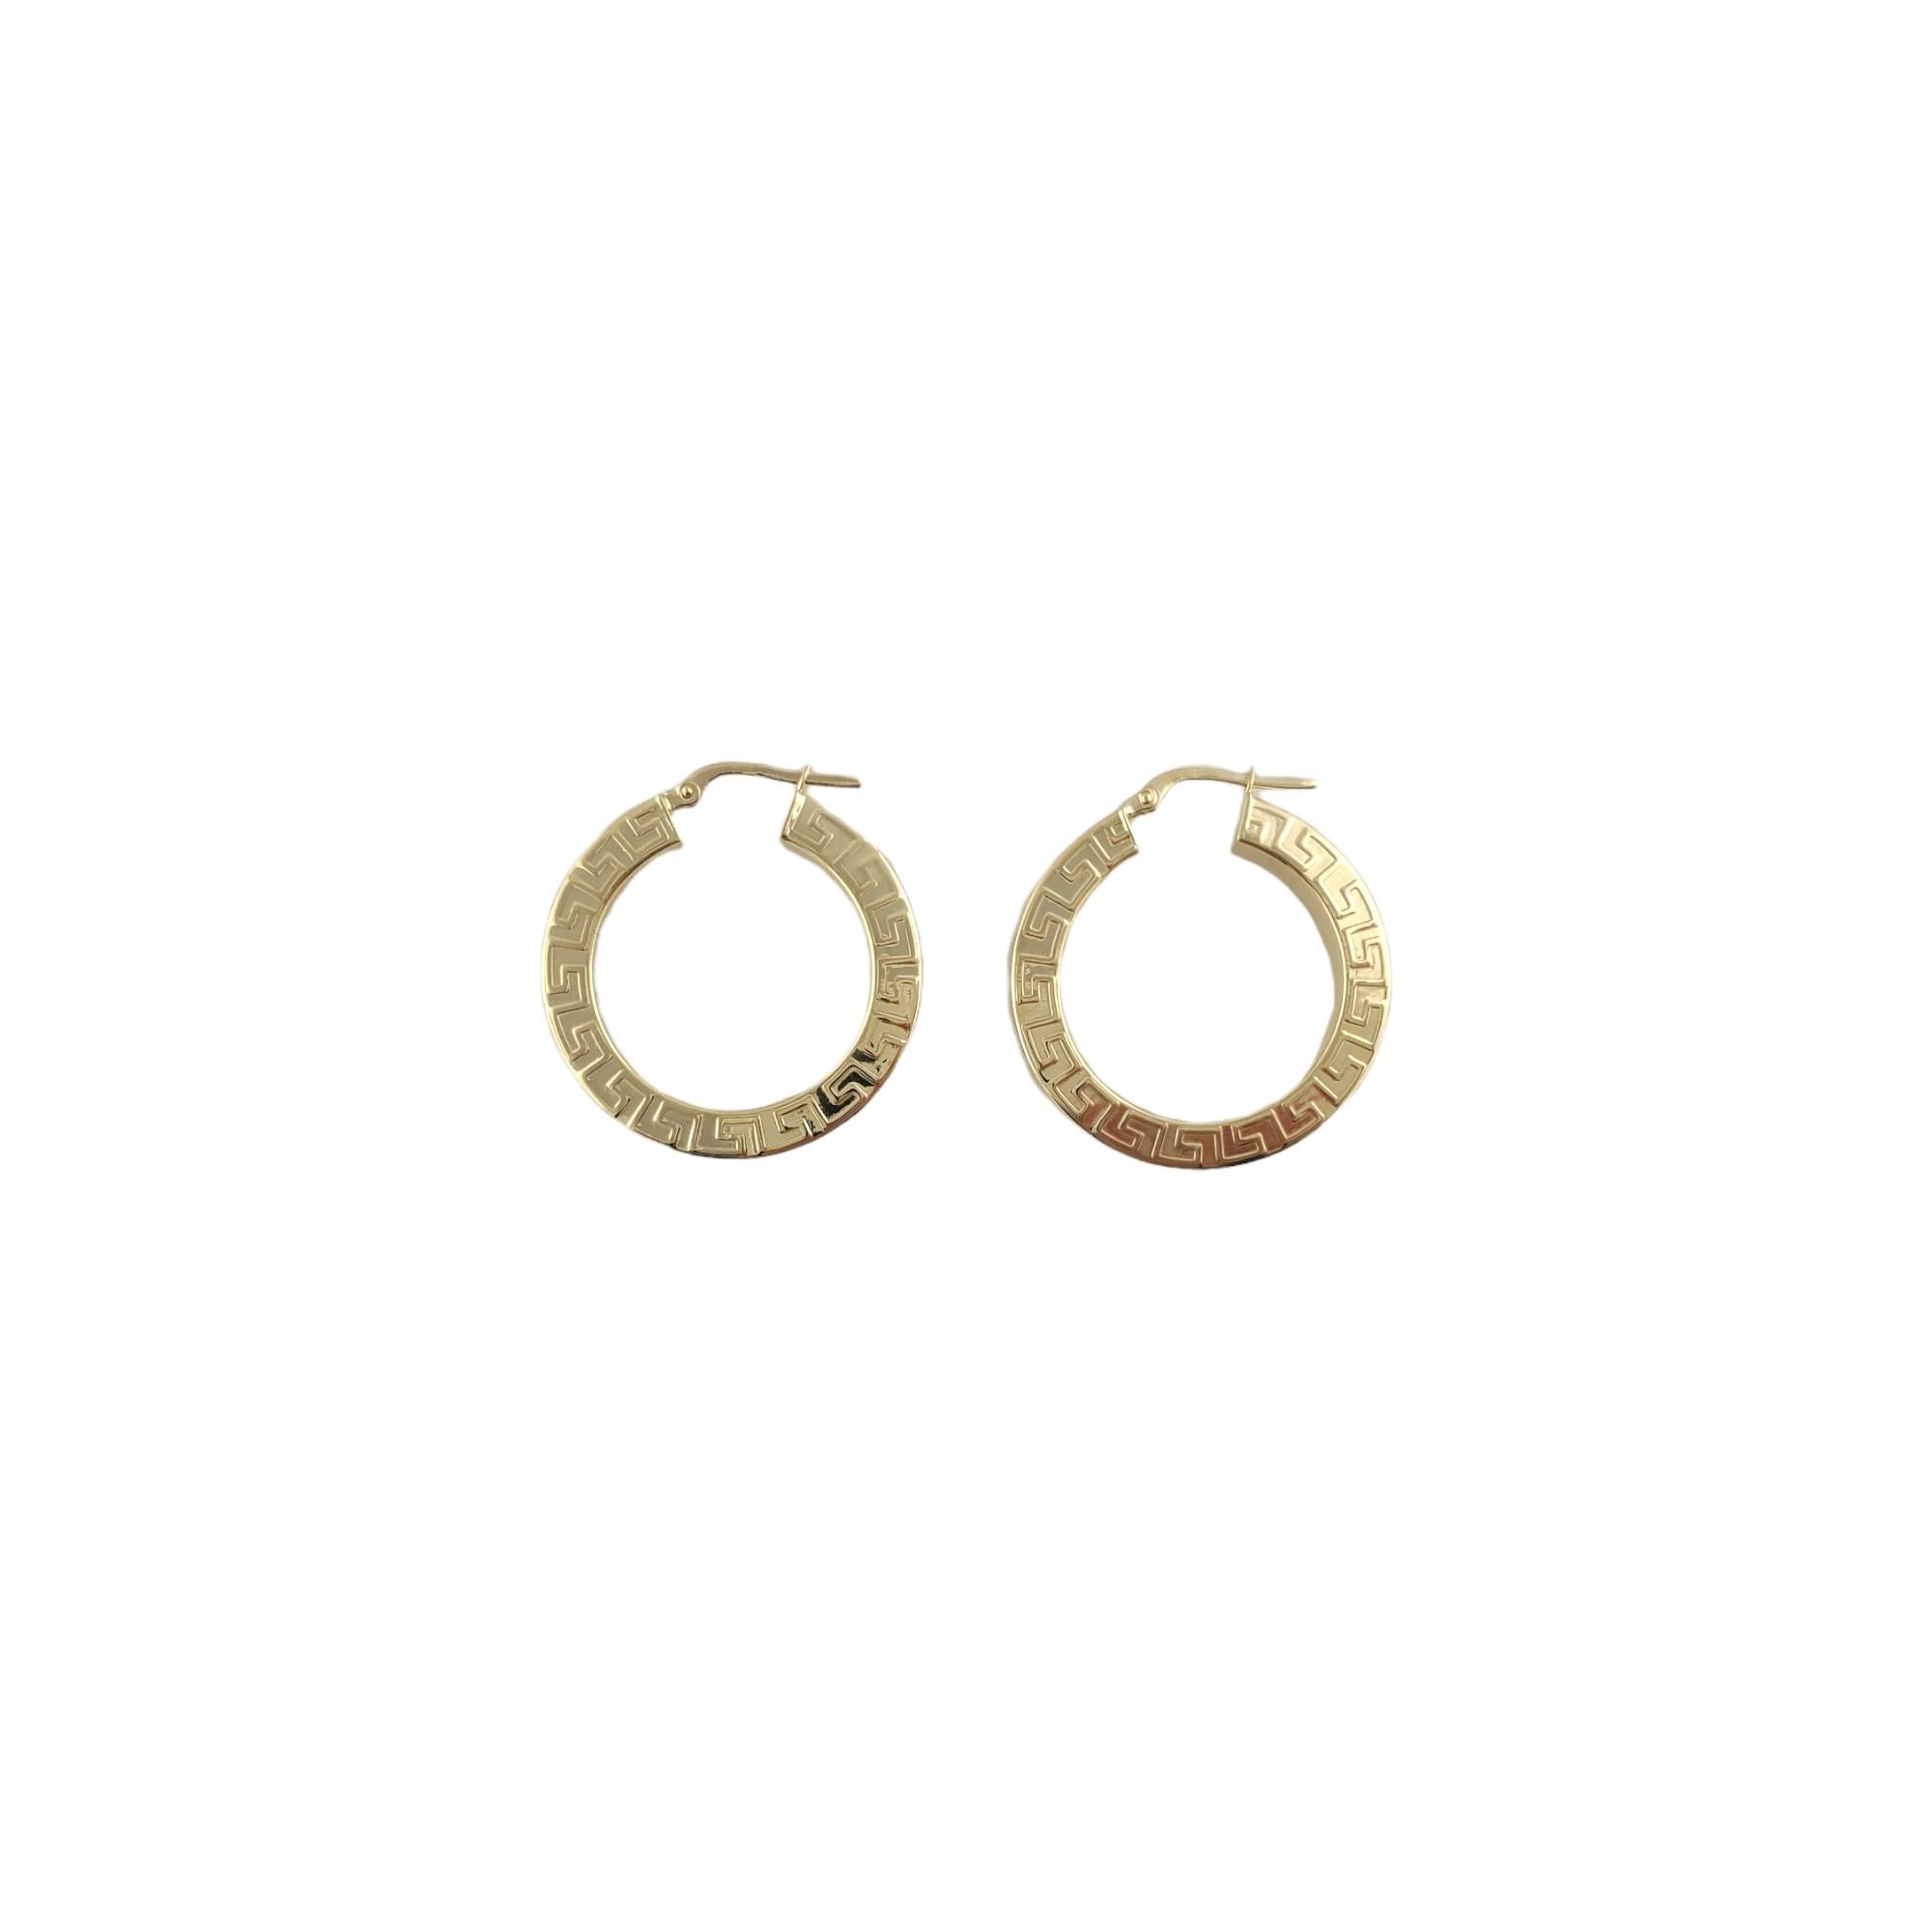 14K Yellow Gold Tribal Pattern Hoops

Beautiful hoop earrings are crafted in 14K yellow gold and featuring a tribal type pattern on both sides.

Size: 31mm X 29.5mm X 4mm

Weight: 3.6 gr / 2.3 dwt

Hallmark: MILOR 14K Italy

Very good condition,